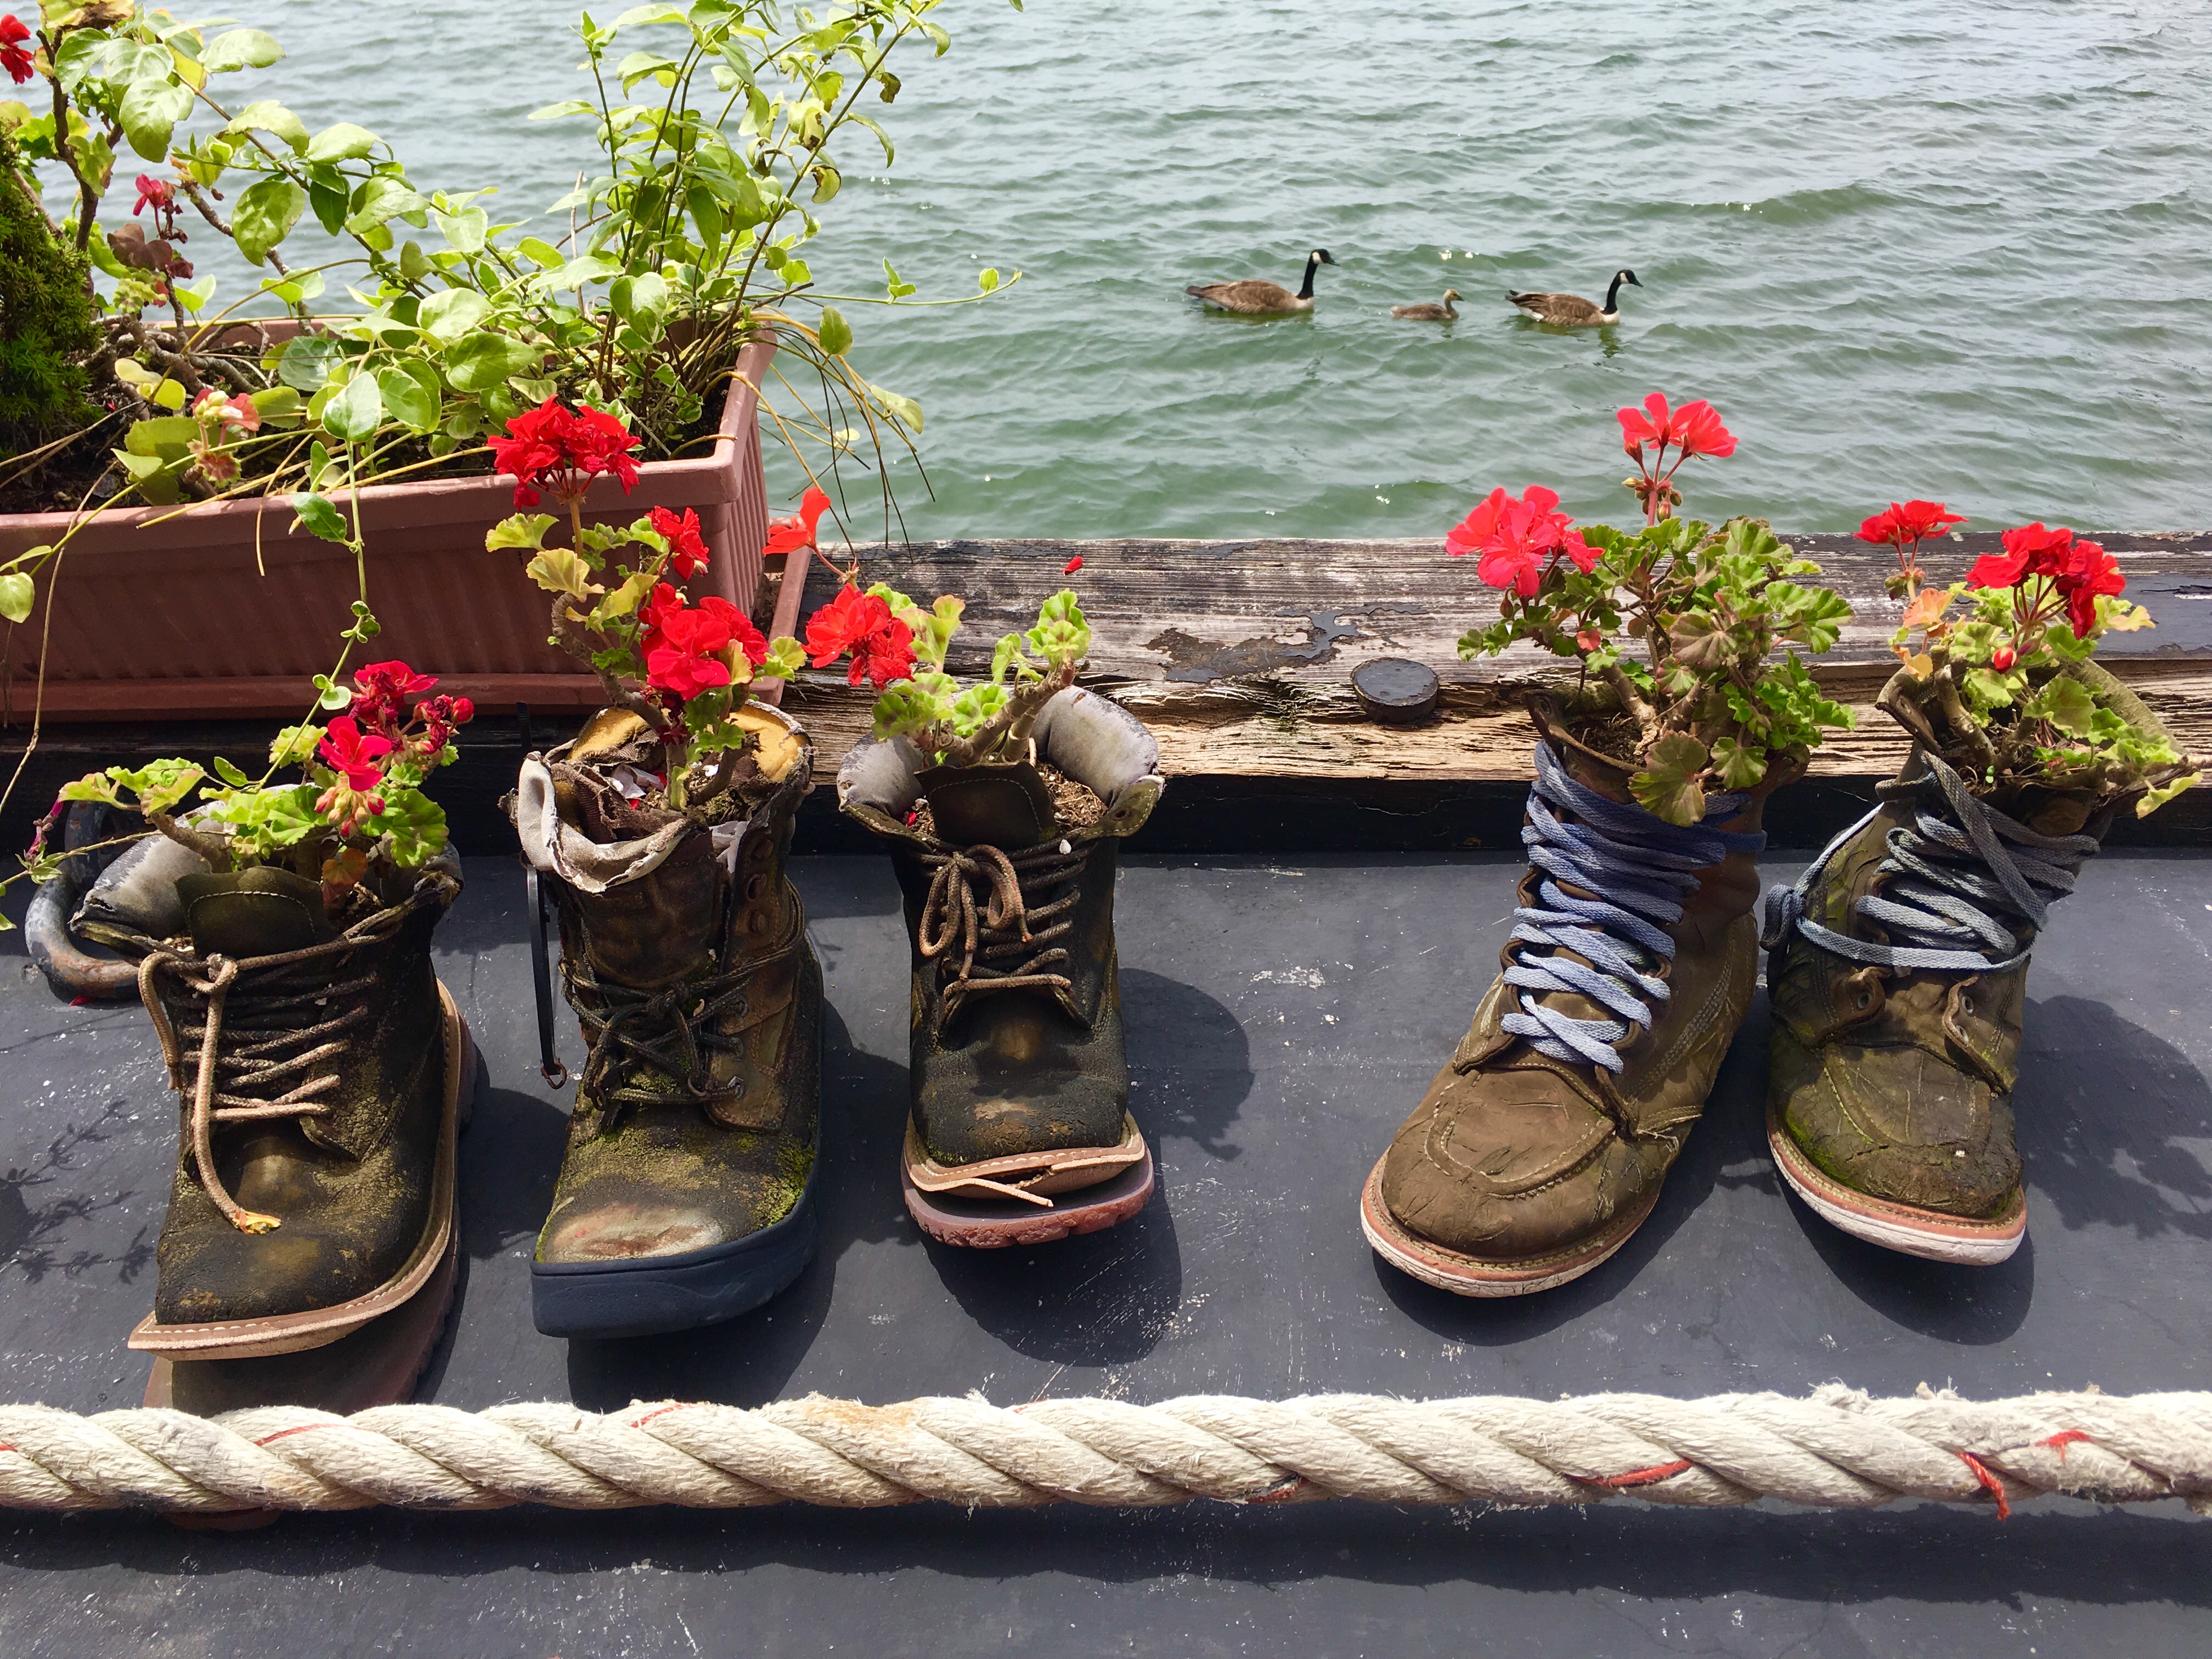 On the museum barge’s outside deck, flowers grow in surprising planters. Eagle photo by Lore Croghan